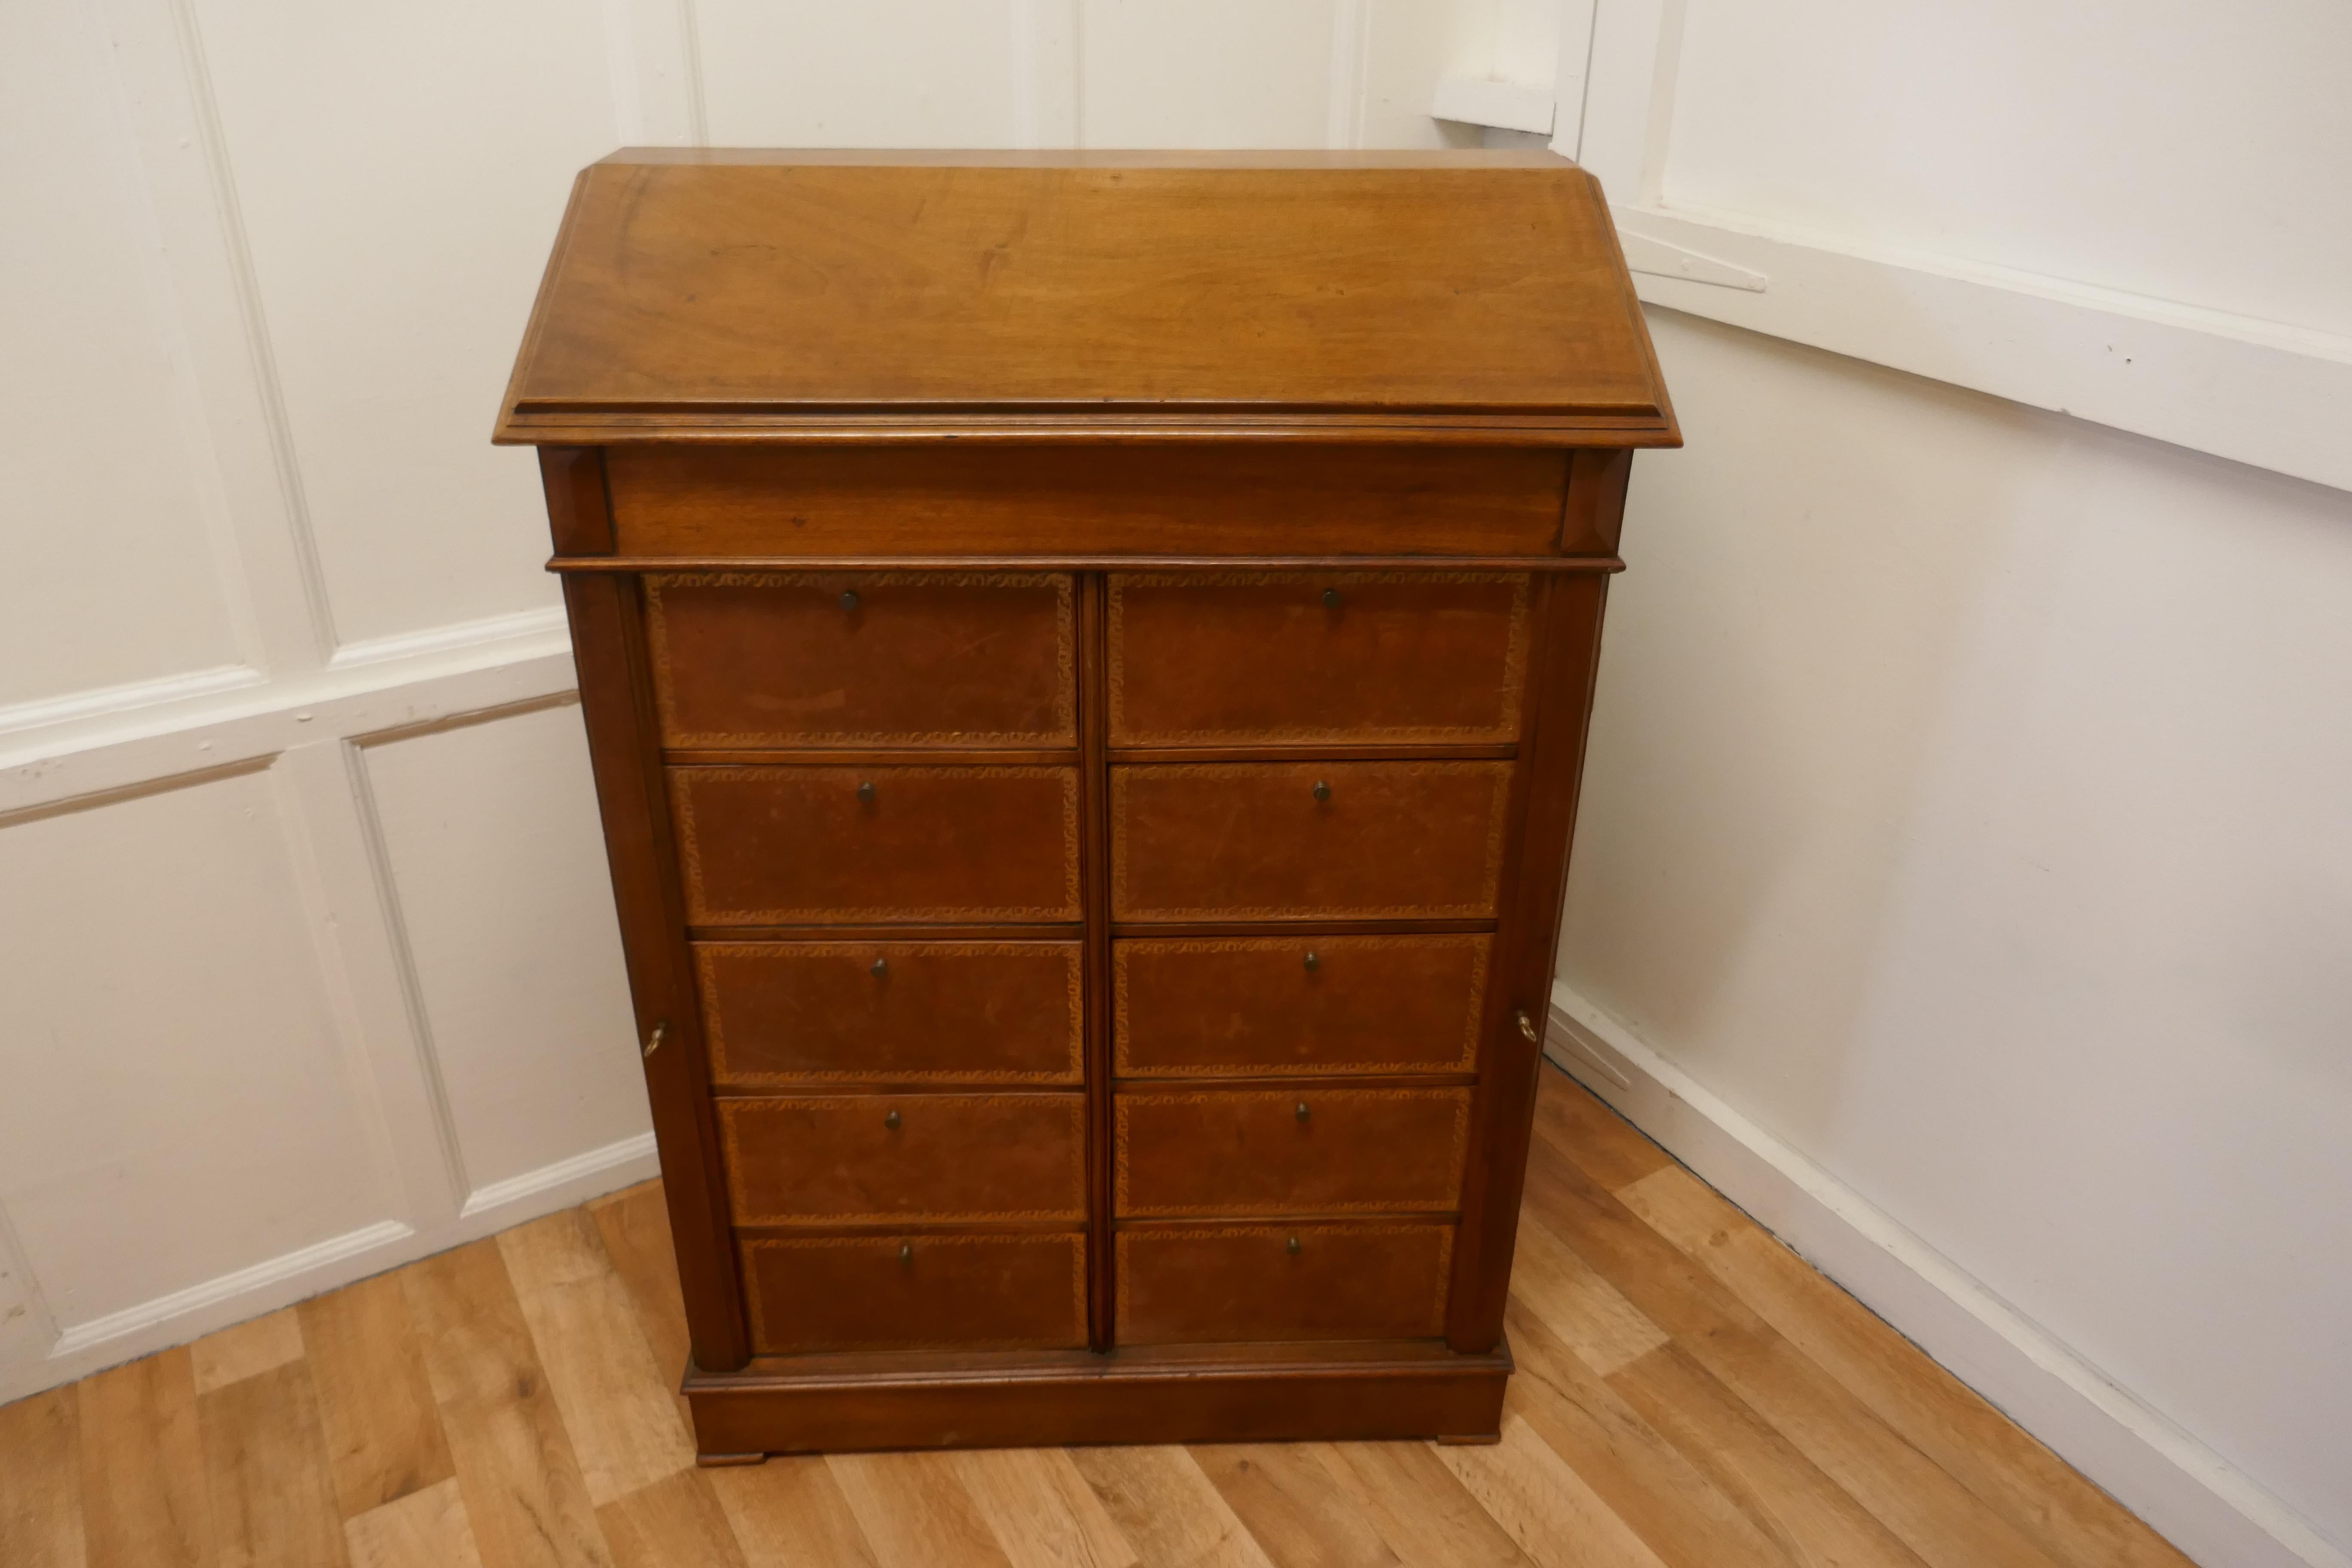 French walnut Cartonniere wellington chest filing cabinet, reception hostess greeting station

This is a traditional French Cartonniere, it is a double bank of 10 tooled tan leather filing compartments in a Wellington style lockable cabinet with